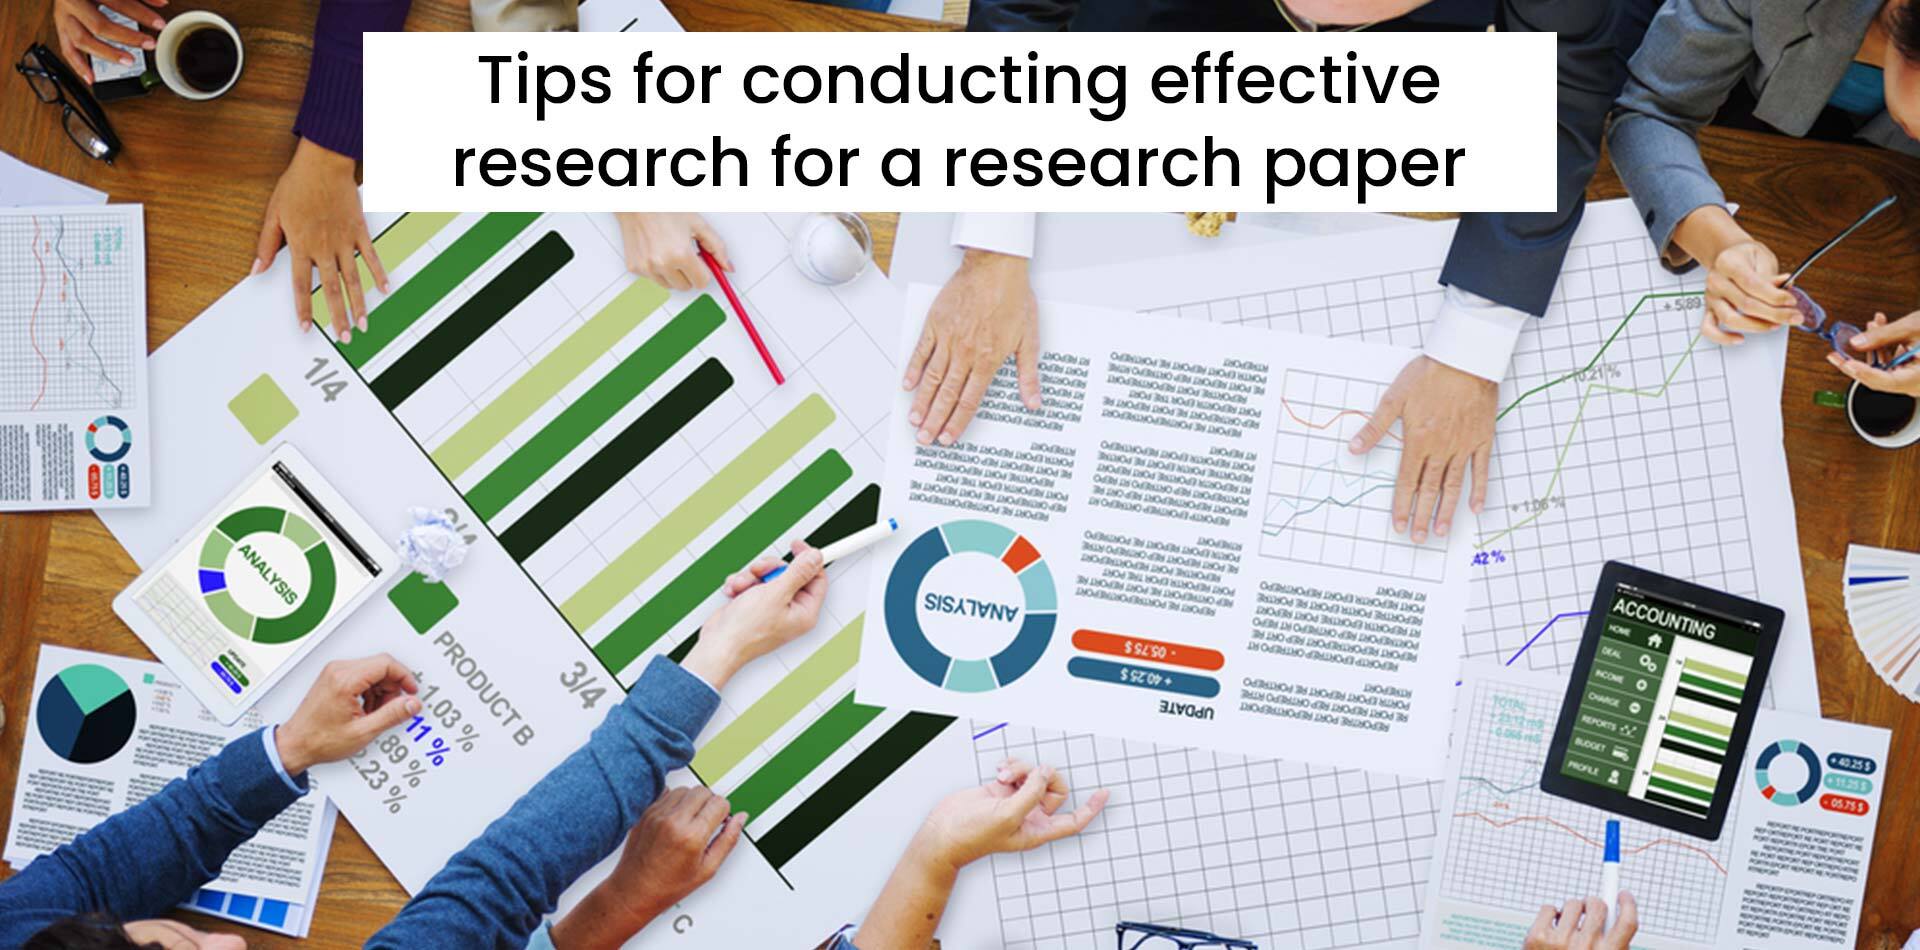 Tips for conducting effective research for a research paper